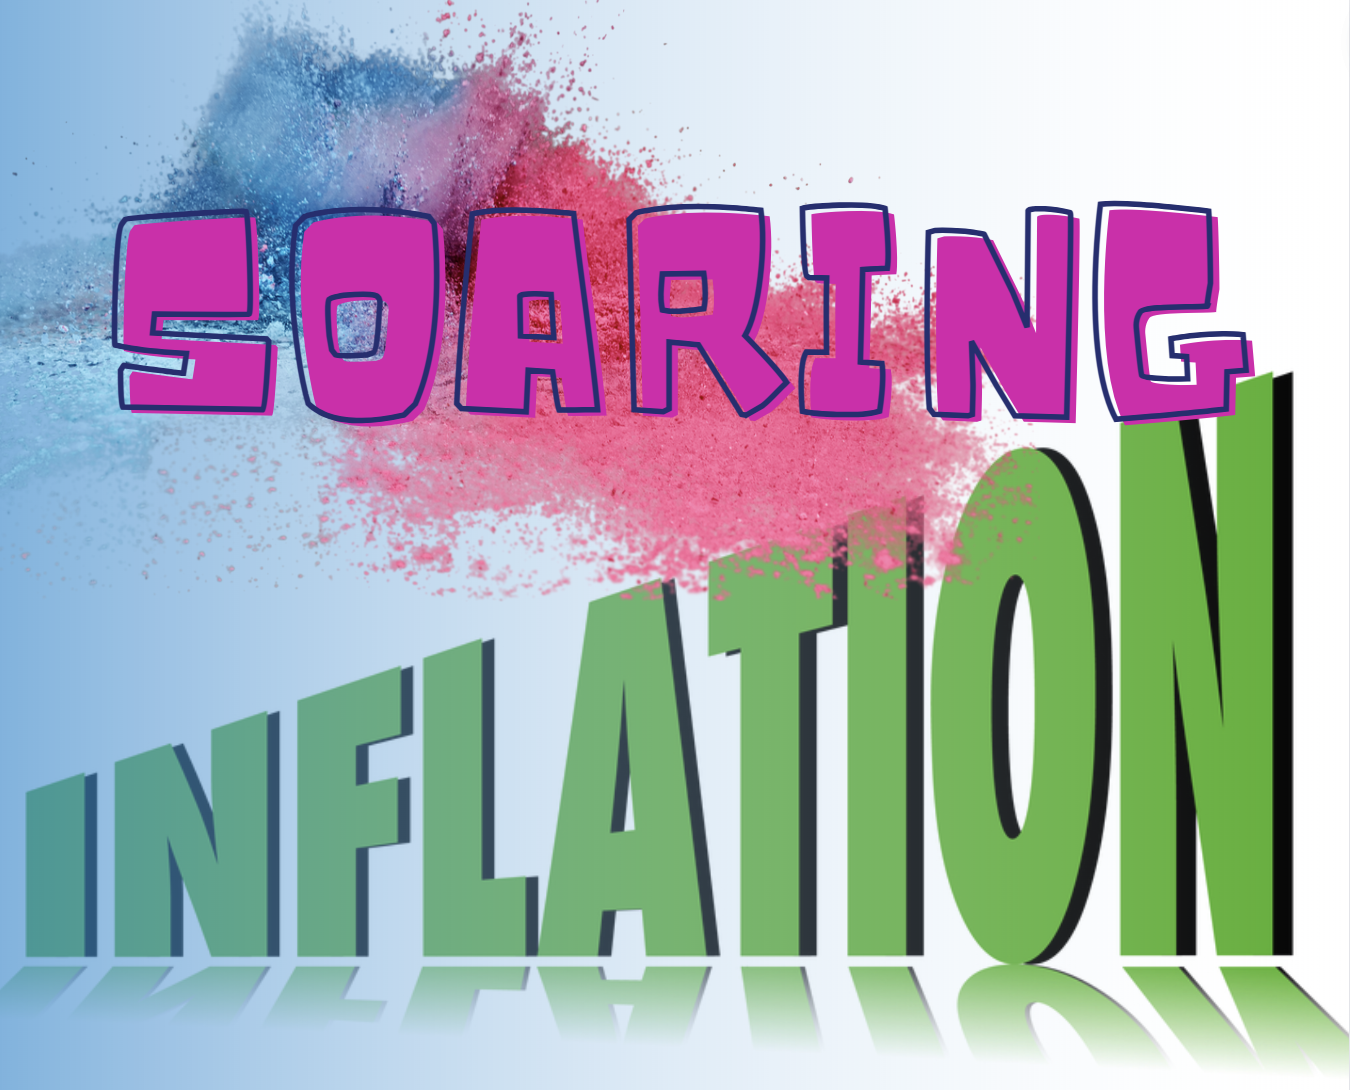 How to Adjust Wealth During Soaring Inflation?